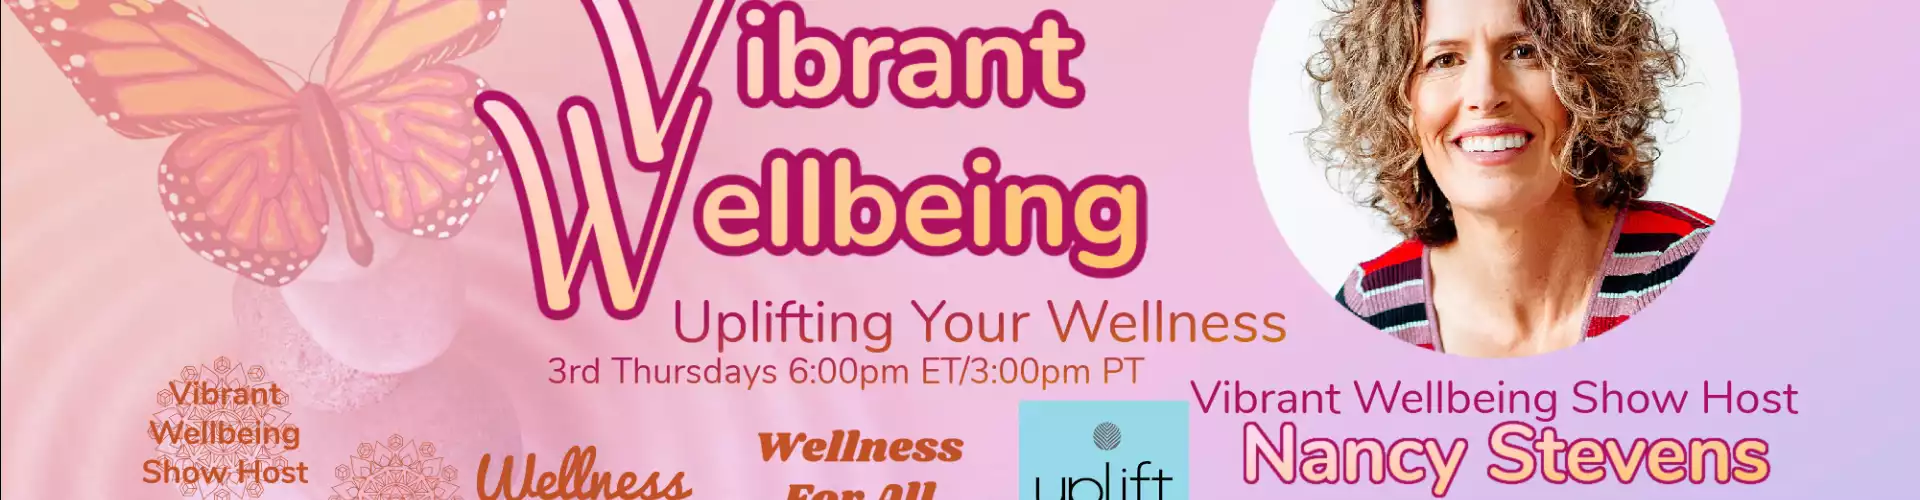 Vibrant Wellbeing with Nancy Stevens for The Wellness Universe